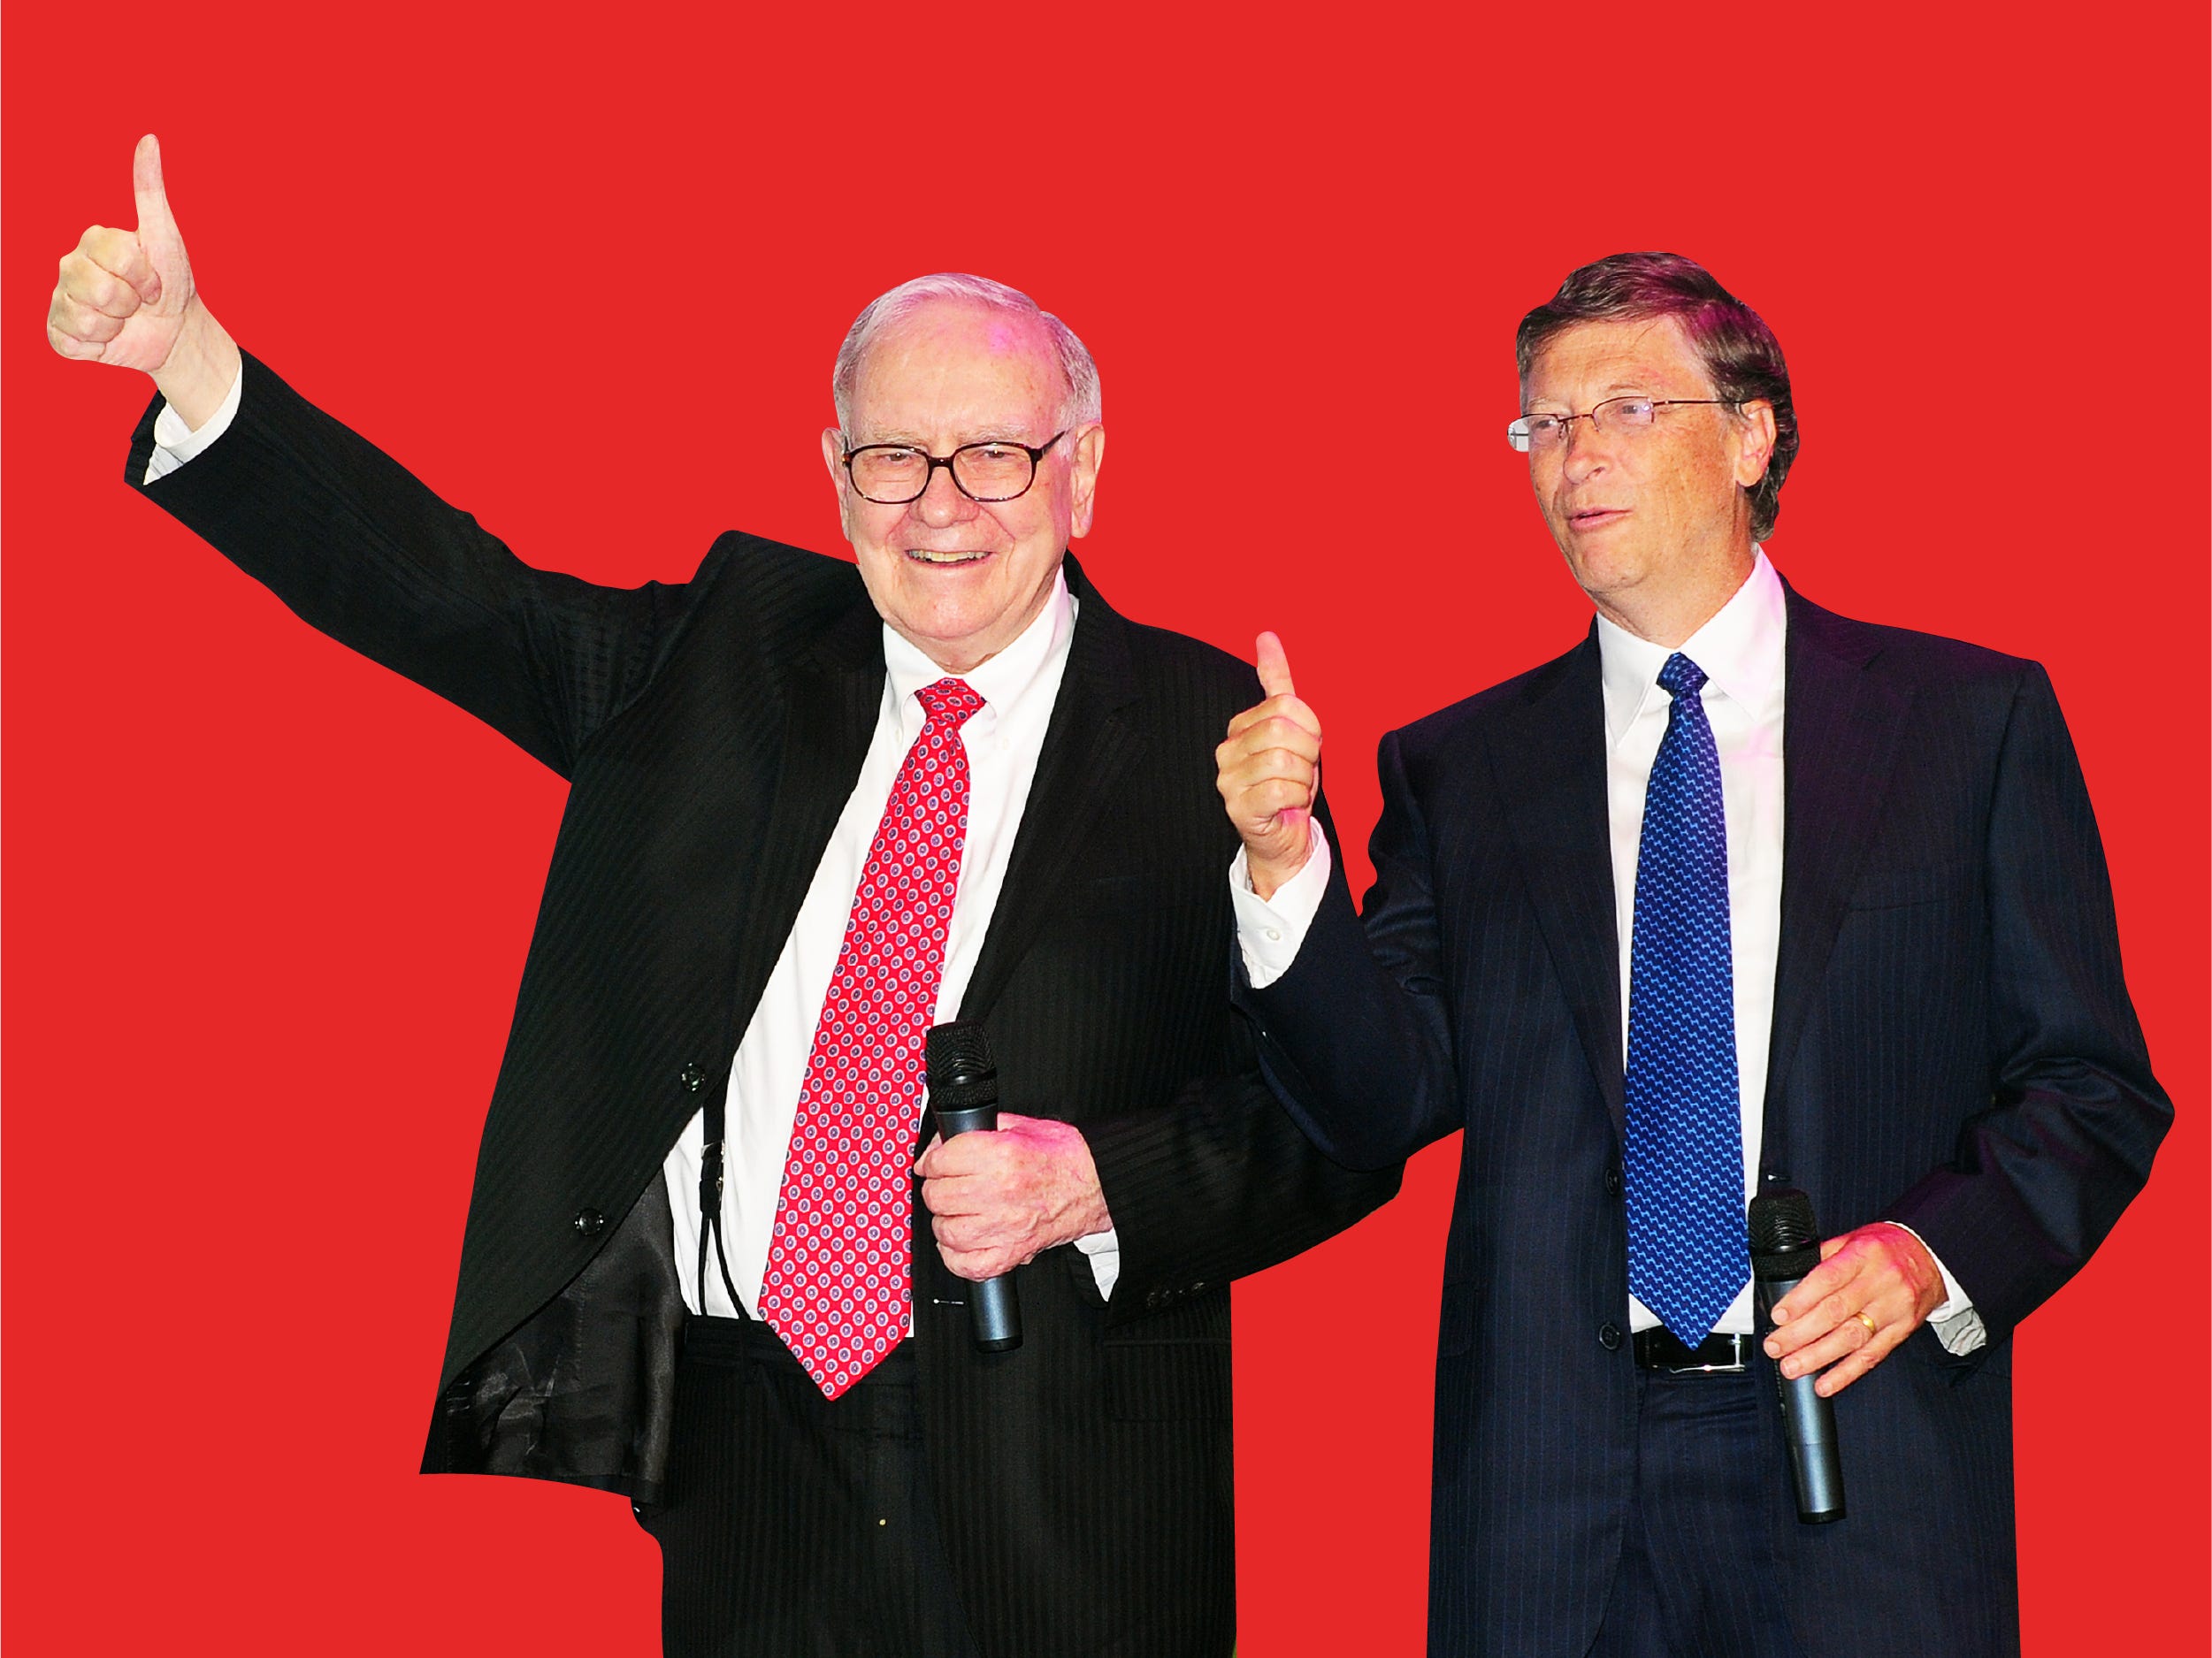 Warren Buffett and Bill Gates on a red background with their thumbs up.